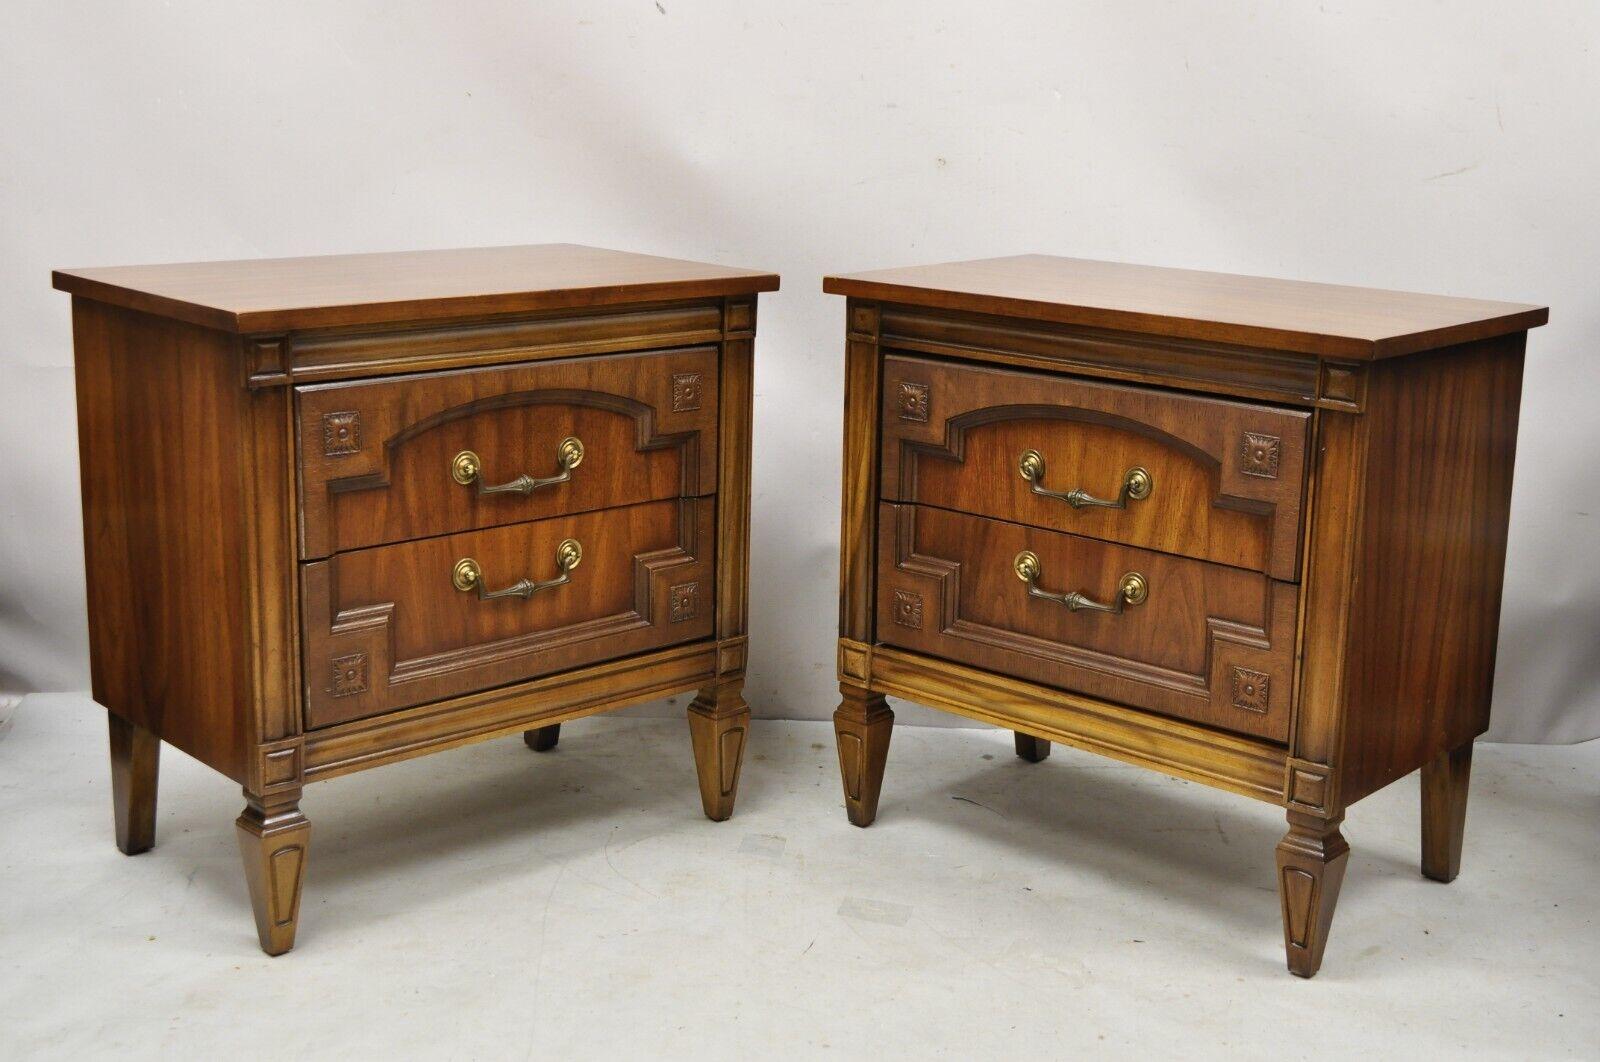 Vintage French Hollywood Regency Style 2 Drawer Nightstand Bedside Table, Pair 1